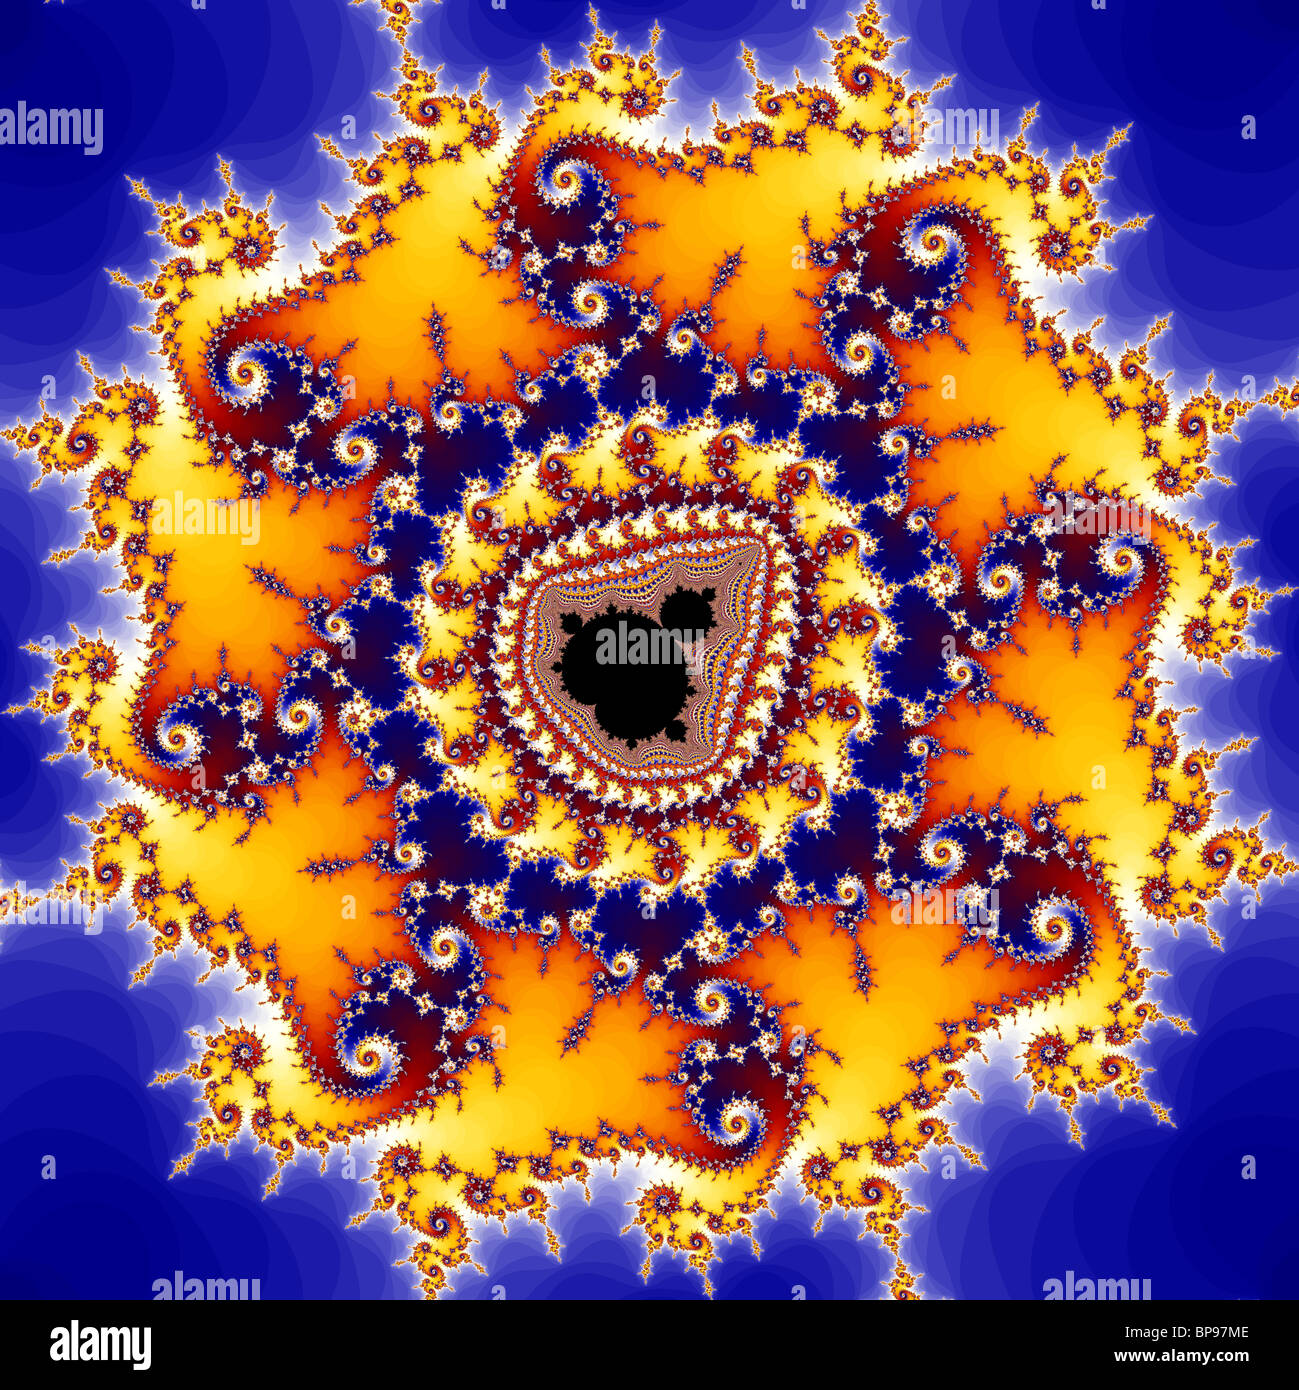 The Mandelbrot Set contains an infinite number of copies of itself ( 'mini Mandelbrots'), surrounded by complex patterns. Stock Photo